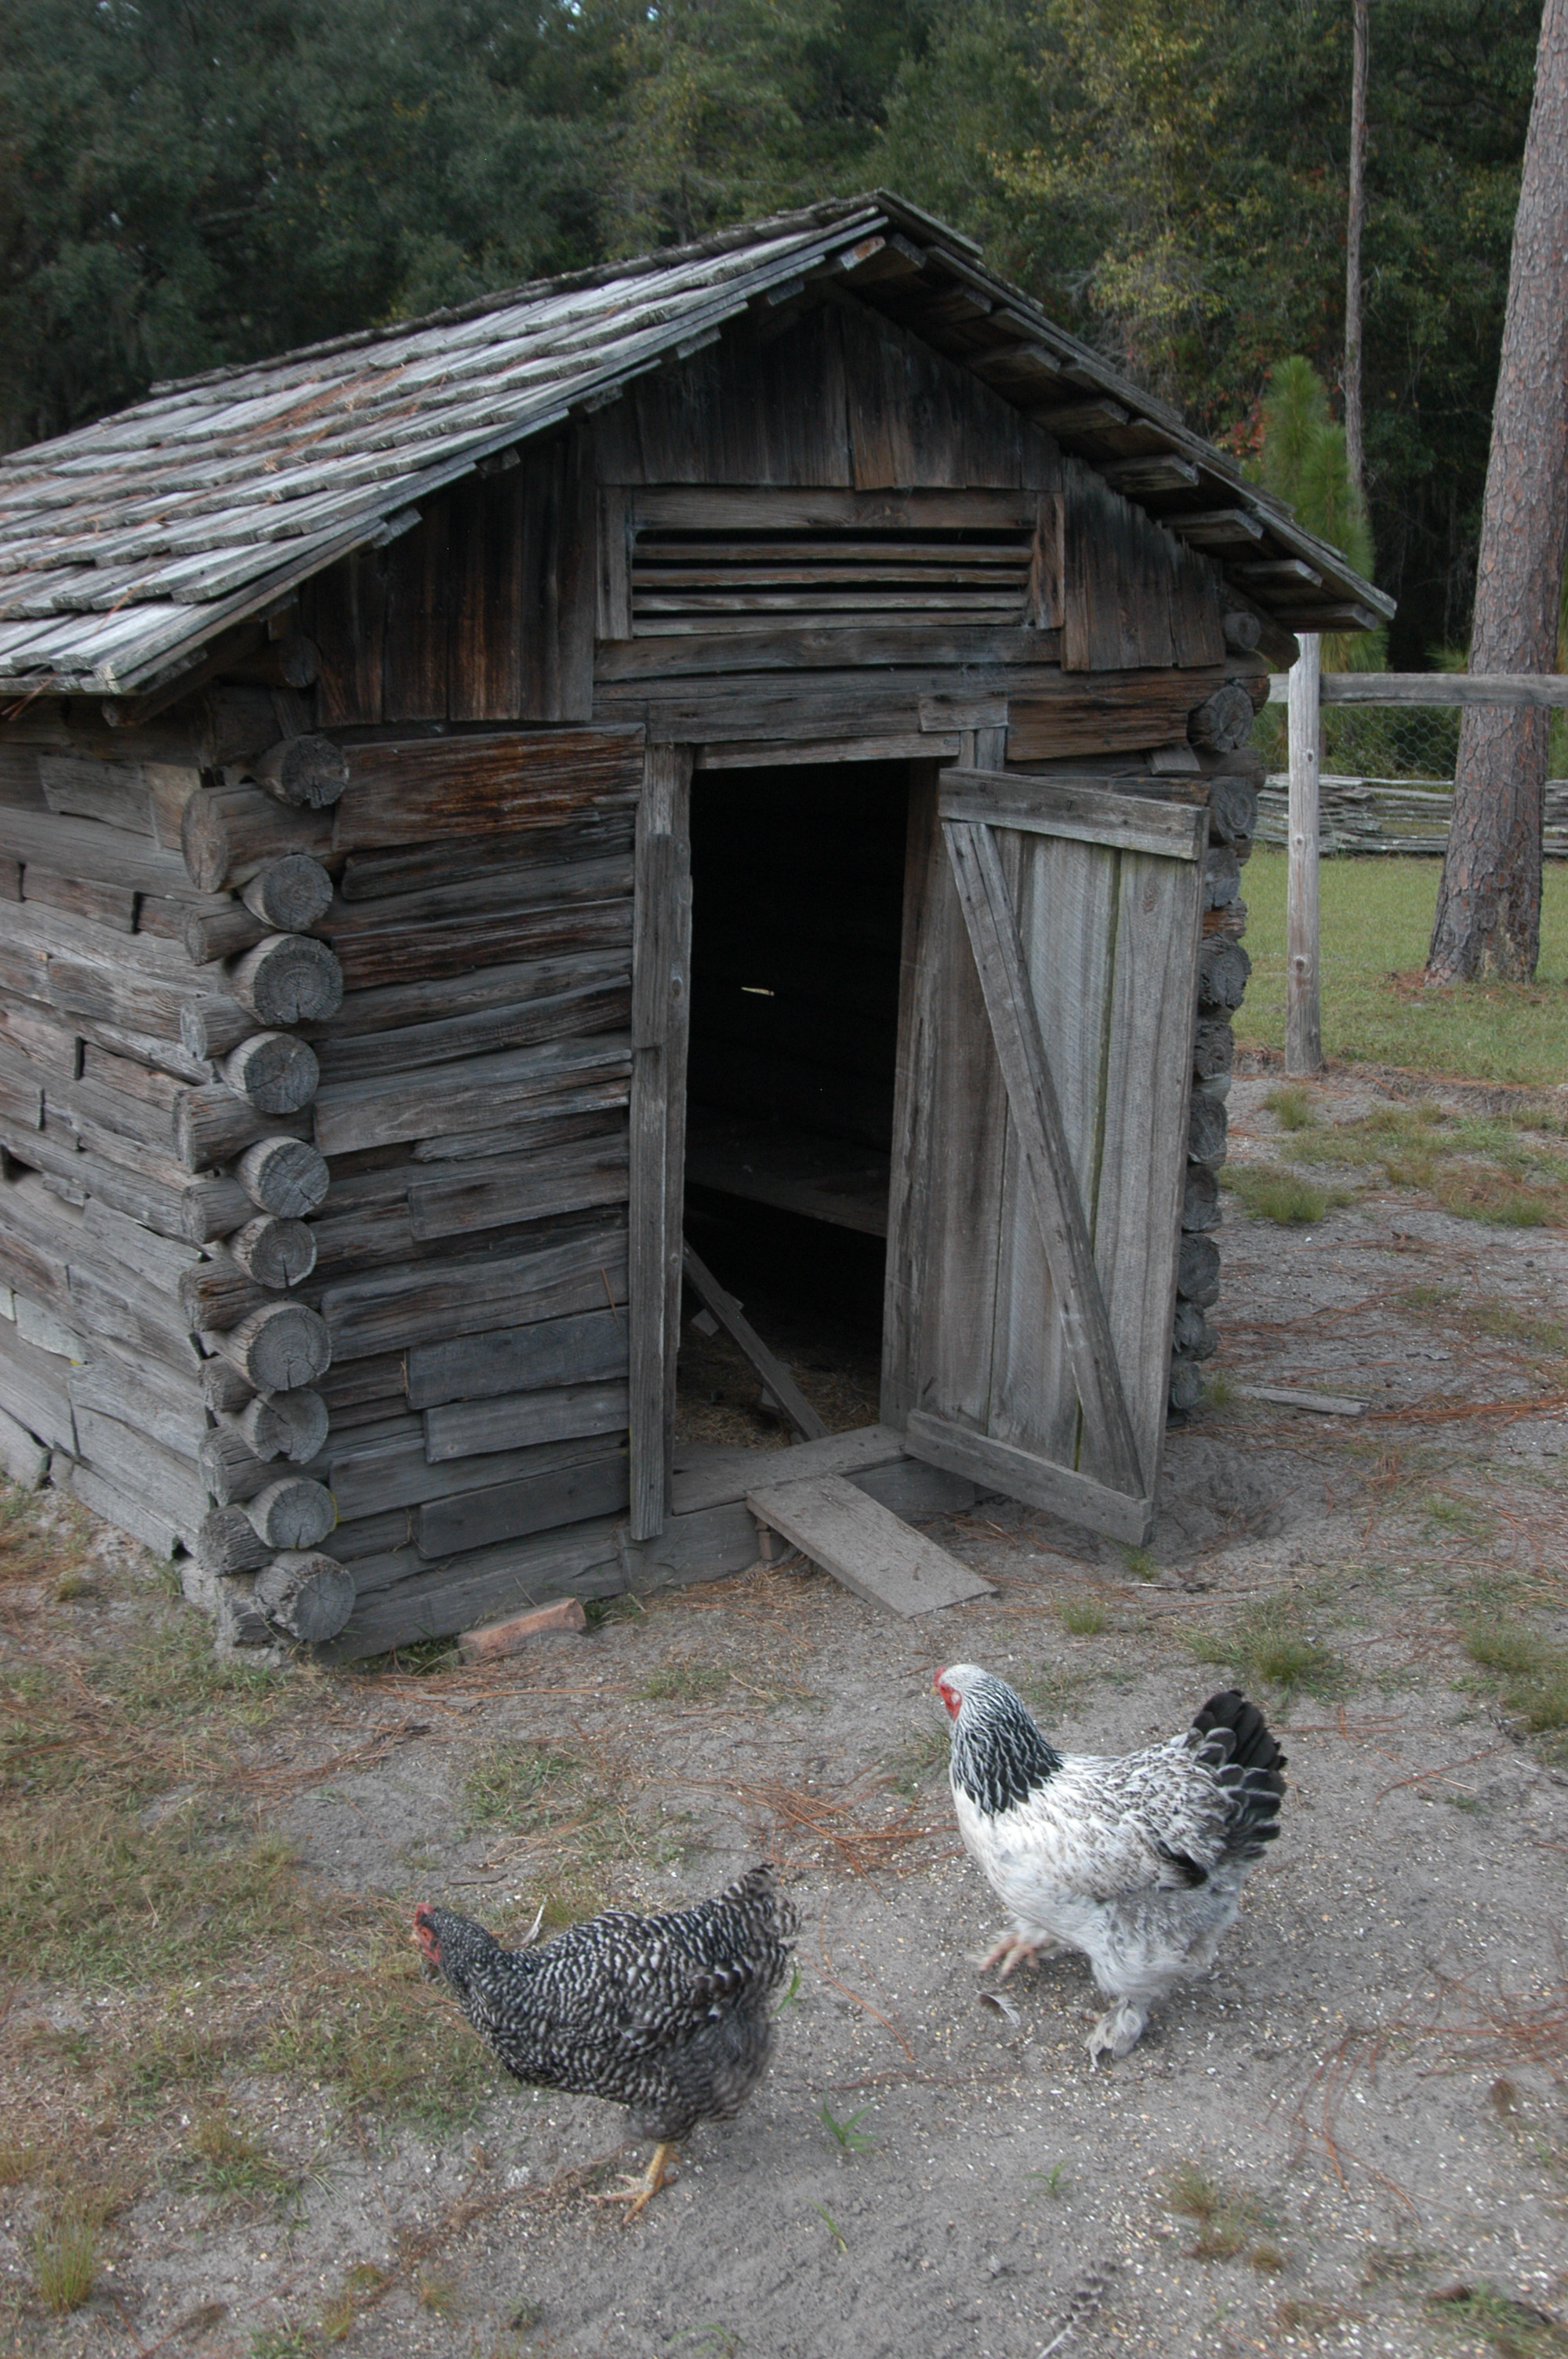 two chickens walk outside of a small wooden hen house.